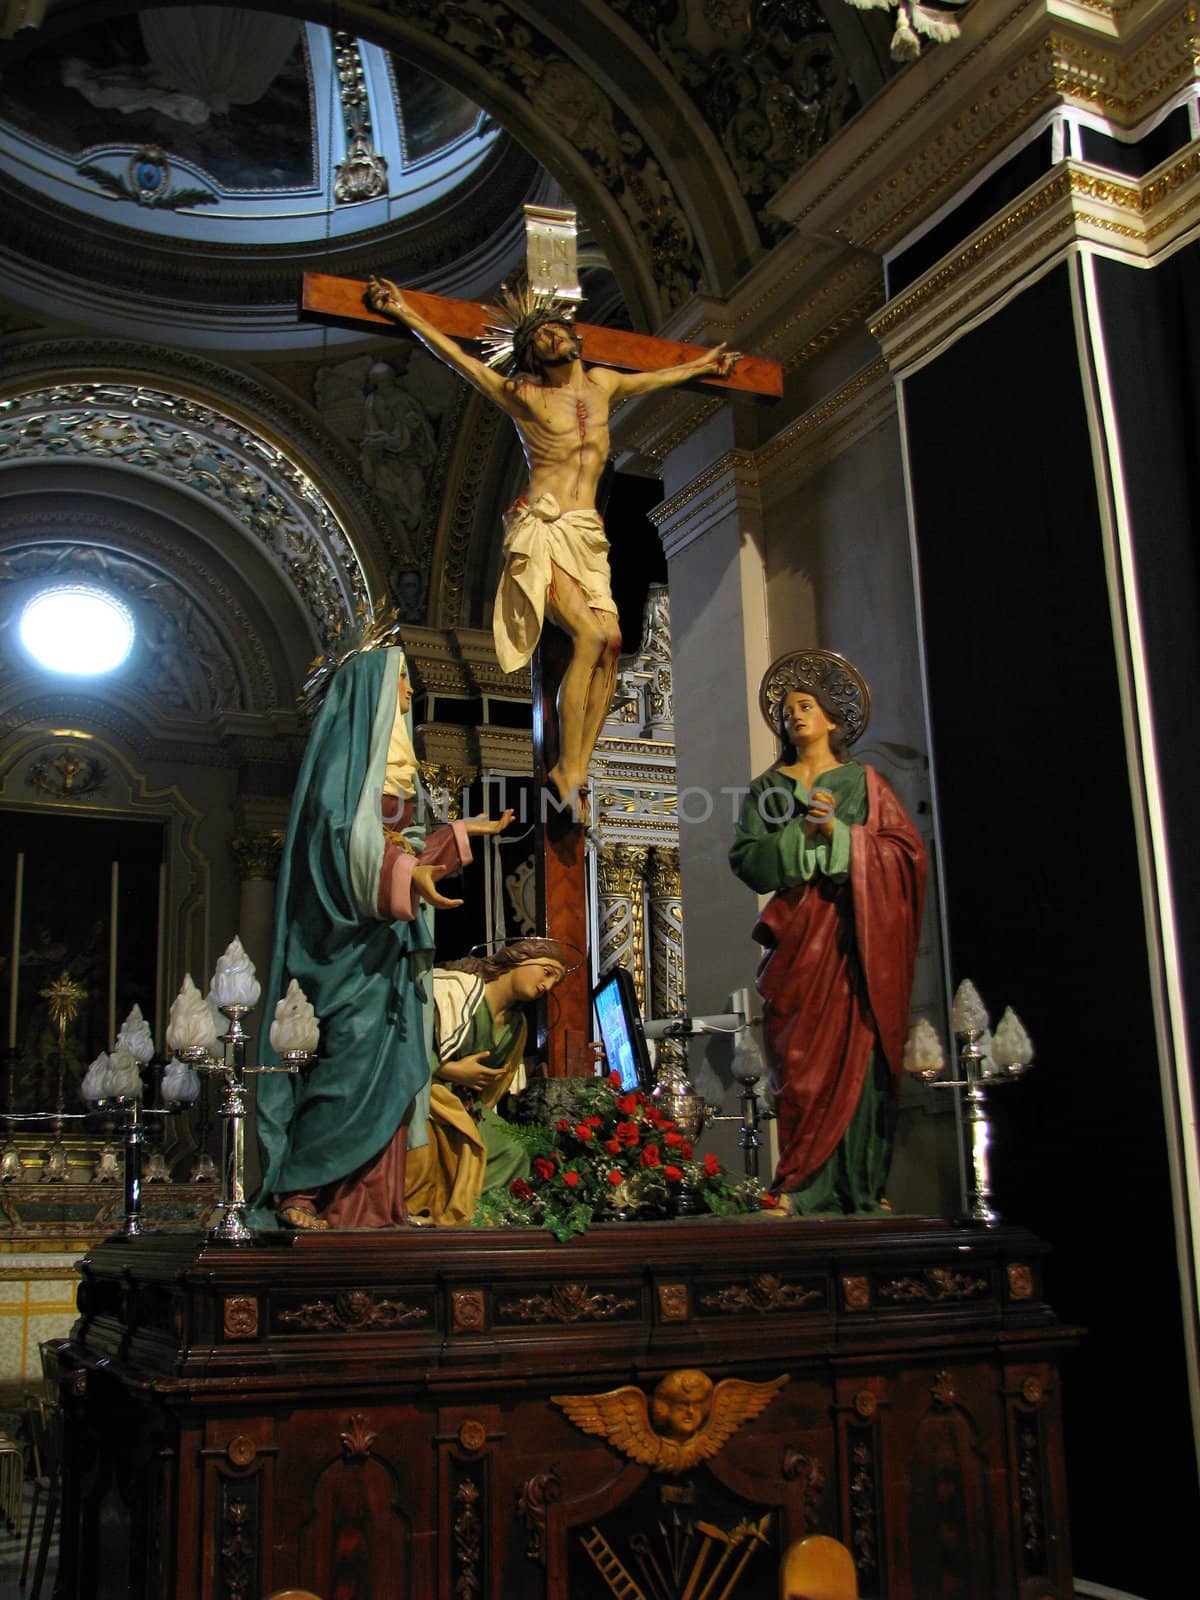 A group of statues portraying The Crucifixion of Christ in Naxxar, Malta.